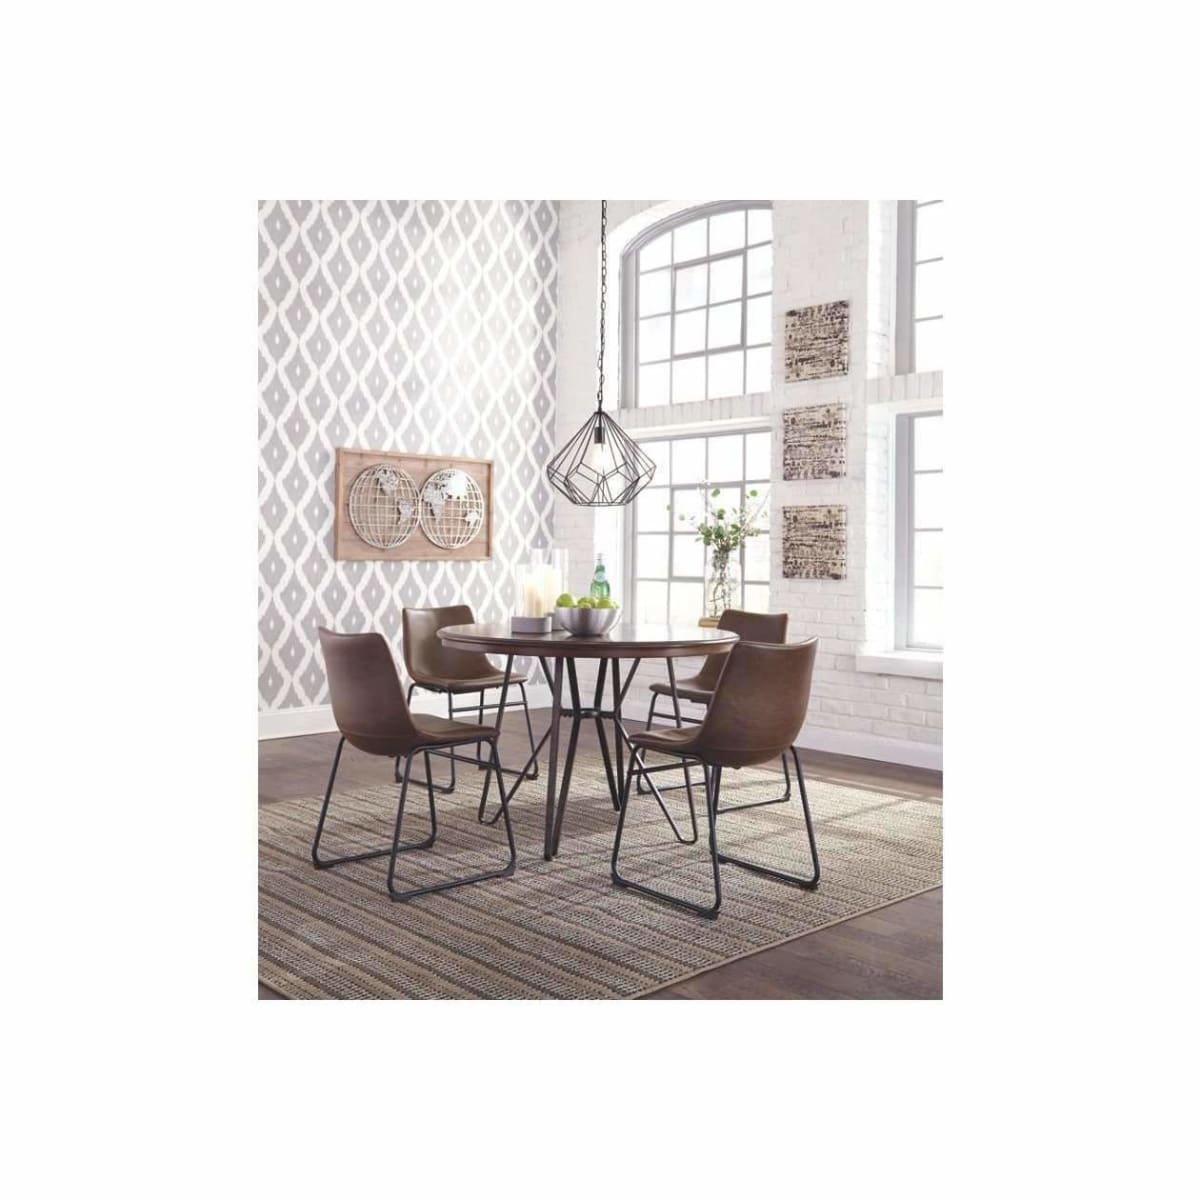 Centiar Dining Room Chair - dining chairs